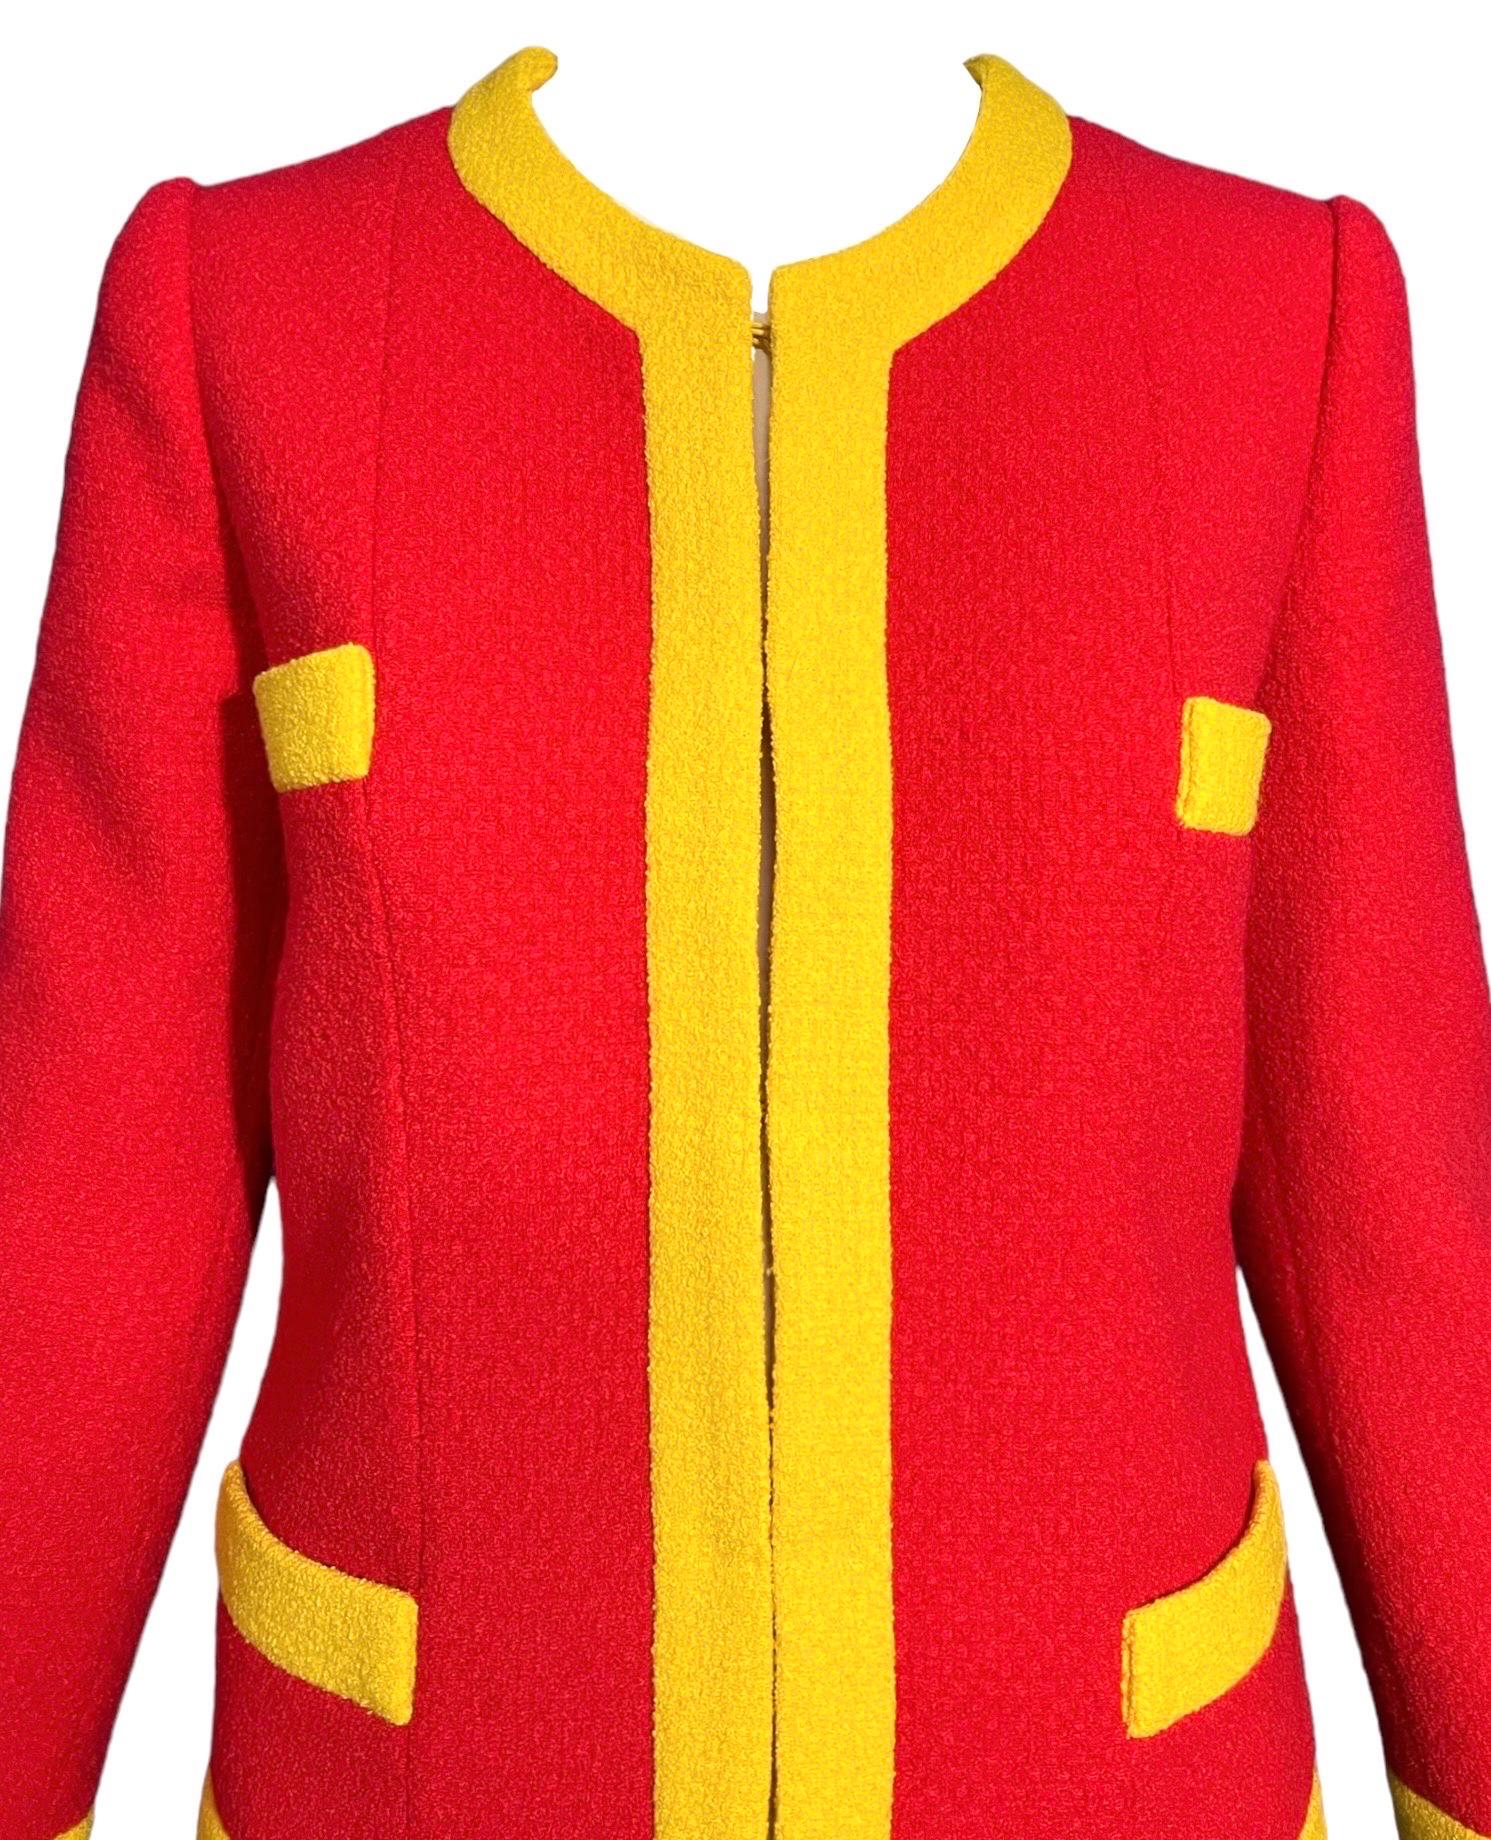 Moschino Couture McDonalds Runway Tweed Blazer F/W 2014 For Sale 6